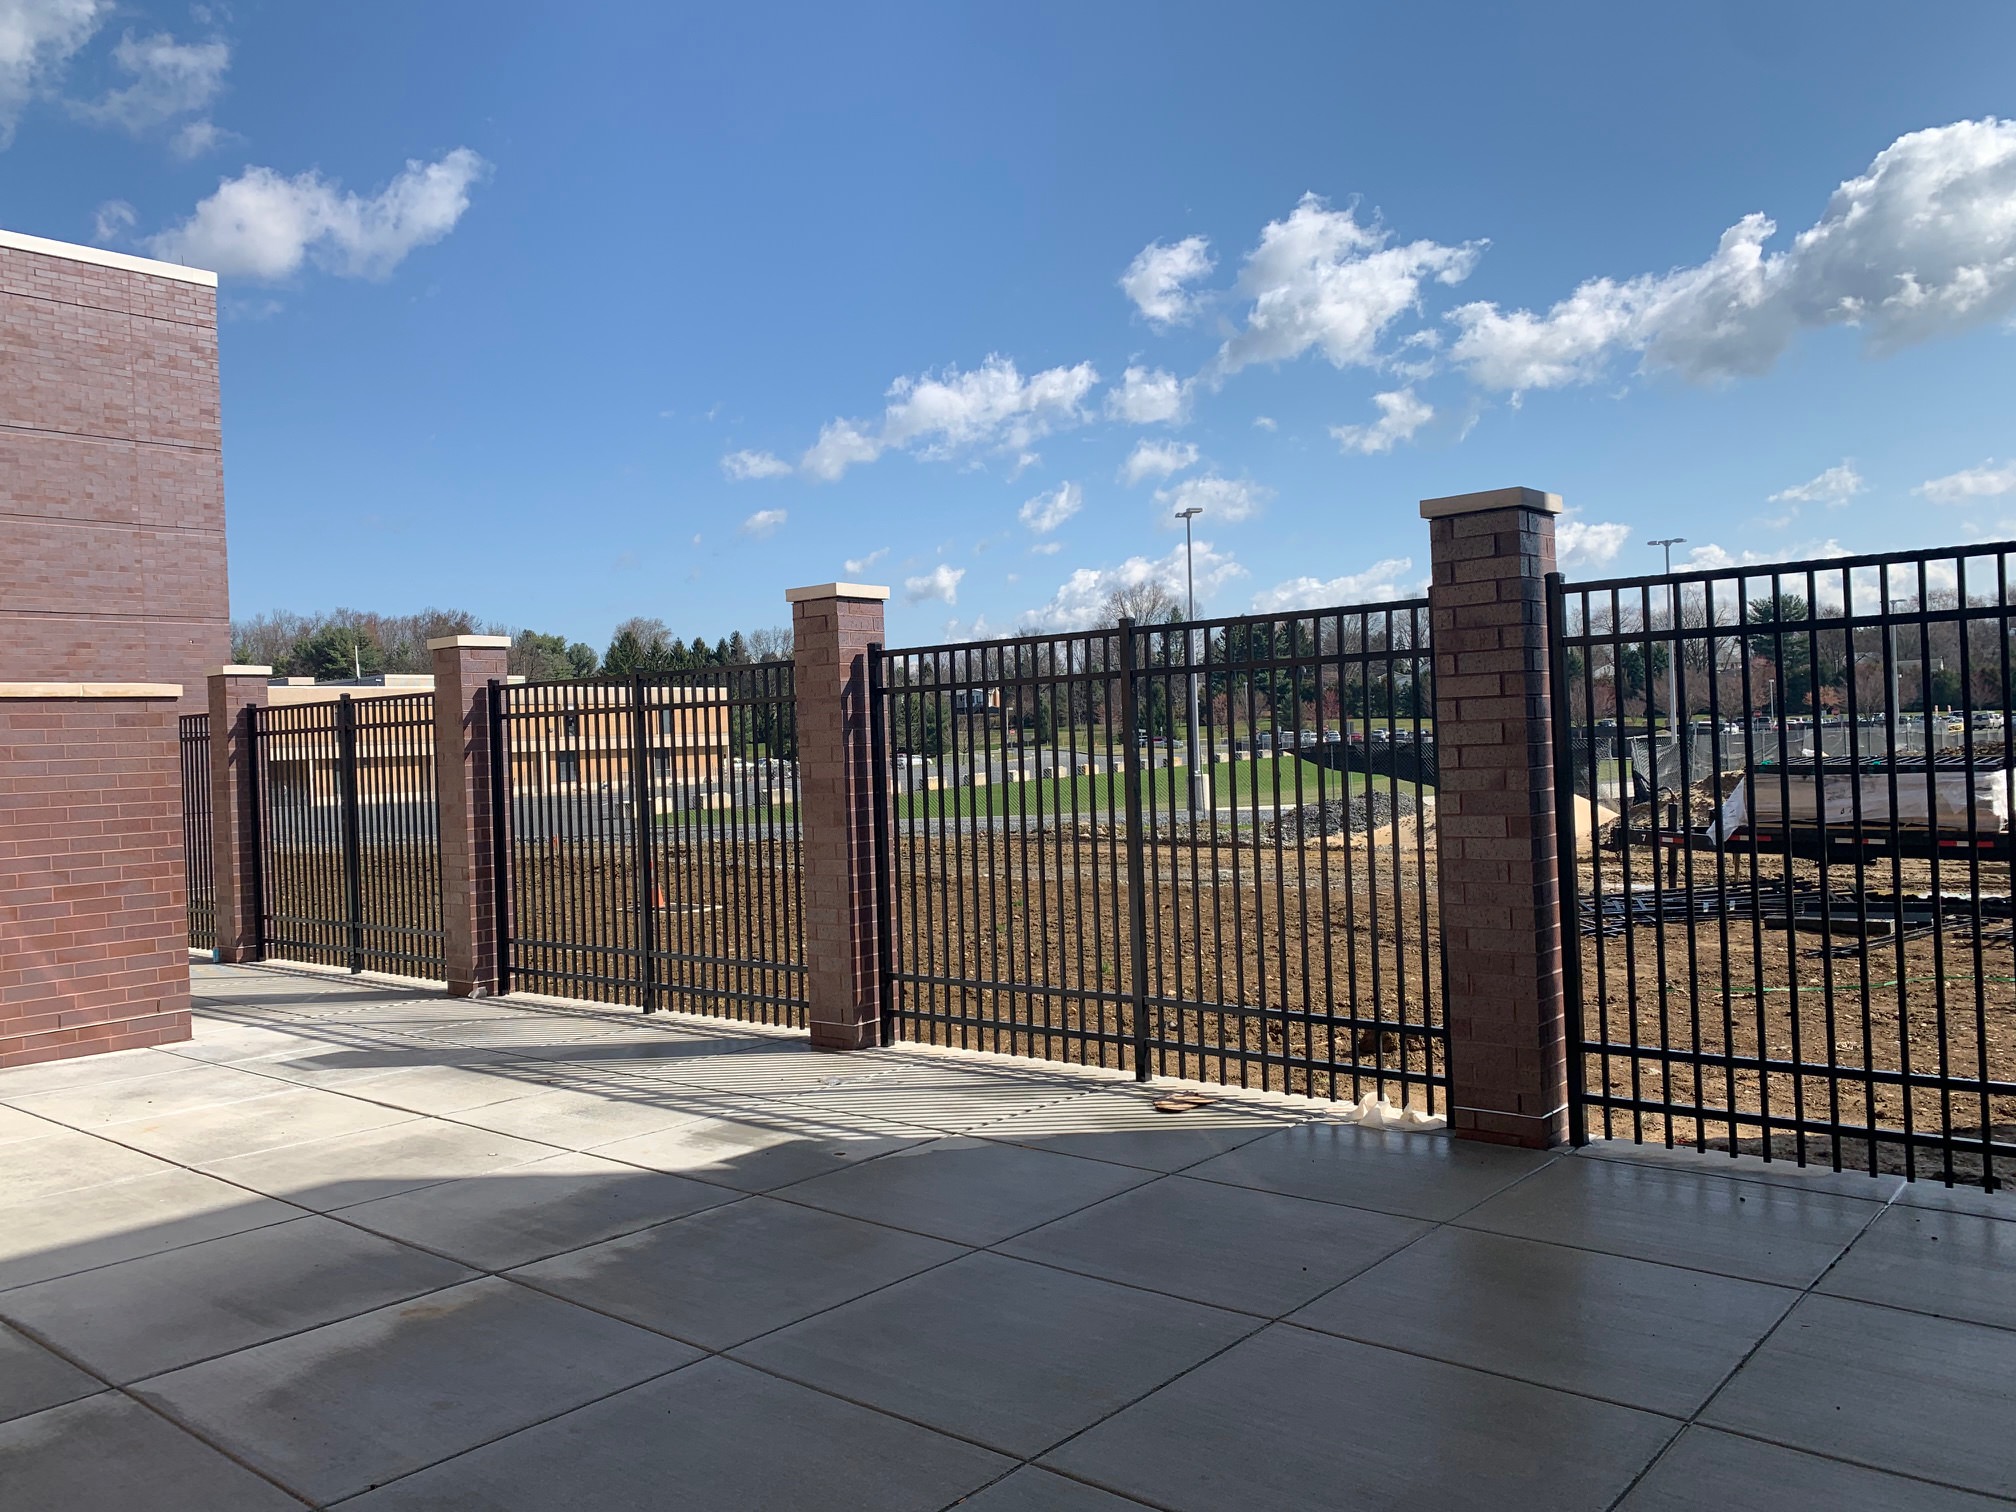 Fencing at outdoor classrooms